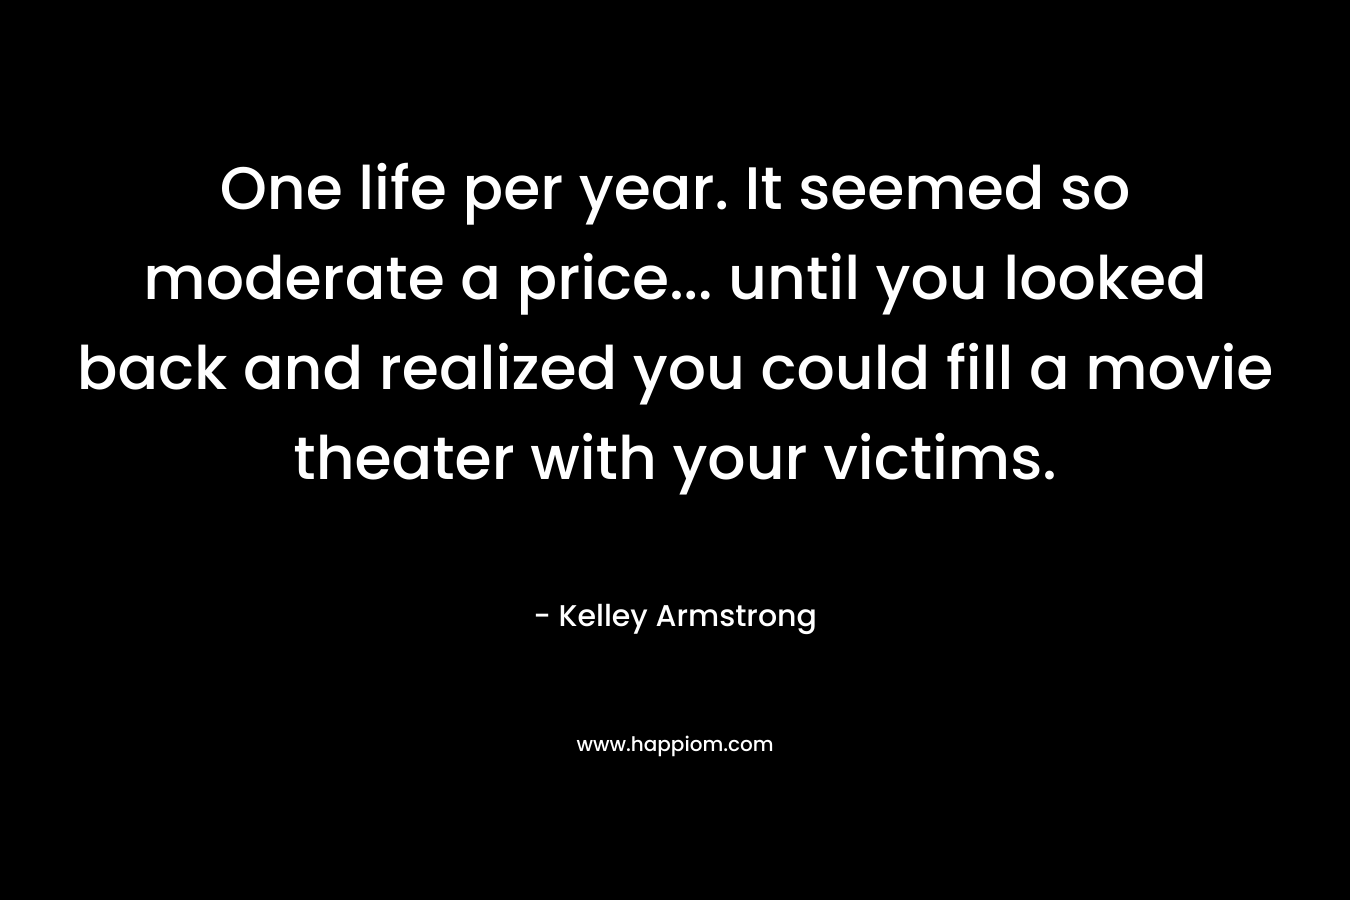 One life per year. It seemed so moderate a price… until you looked back and realized you could fill a movie theater with your victims. – Kelley Armstrong